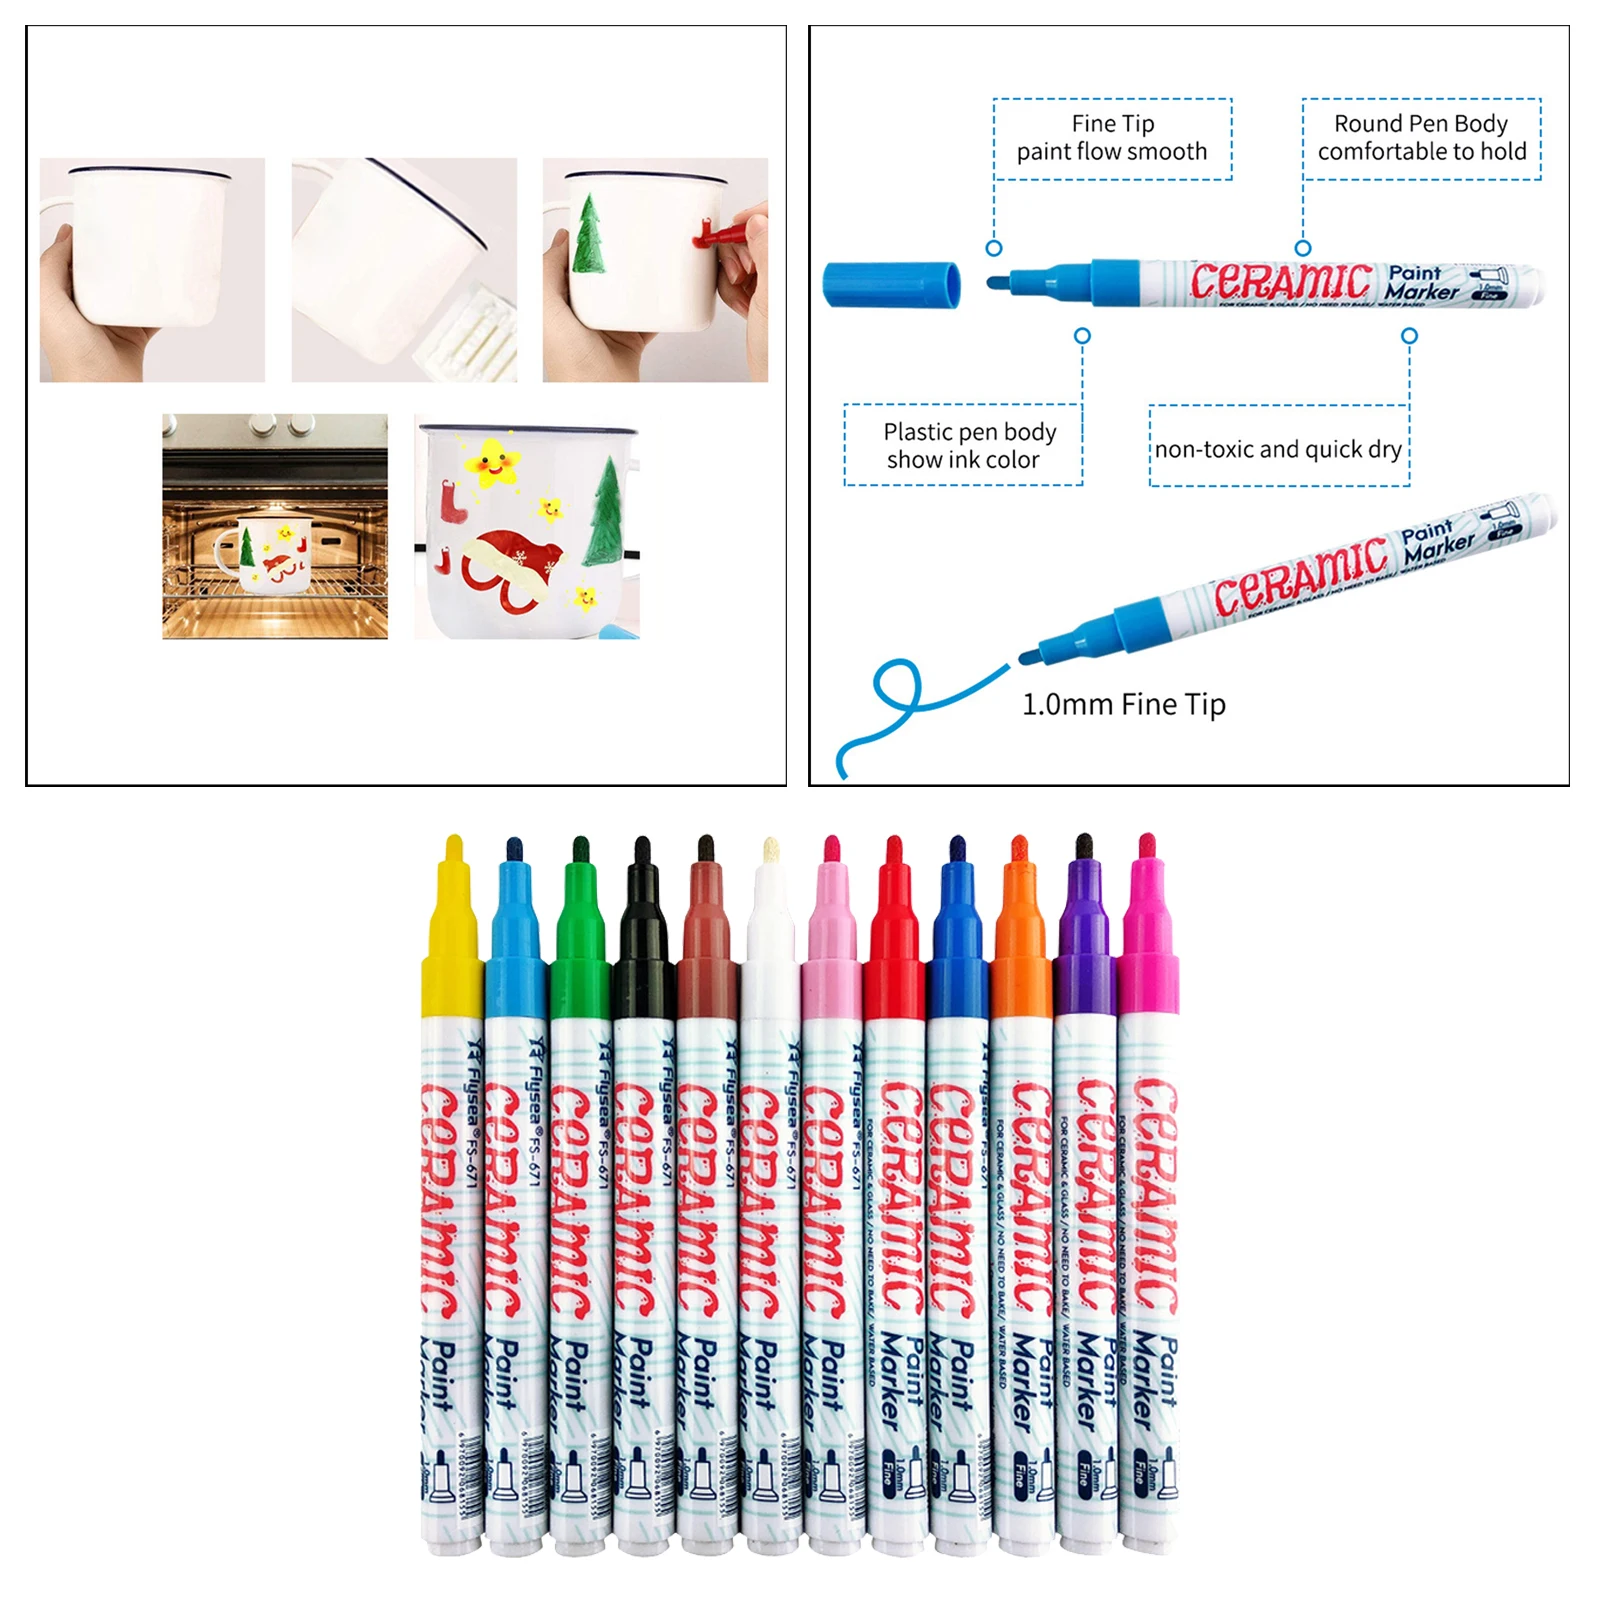 12 Colors 132mm Water Based Paint Pens Marker Pens for Rock Painting, Ceramic, Mugs Cups, 1.0mm Writing Width